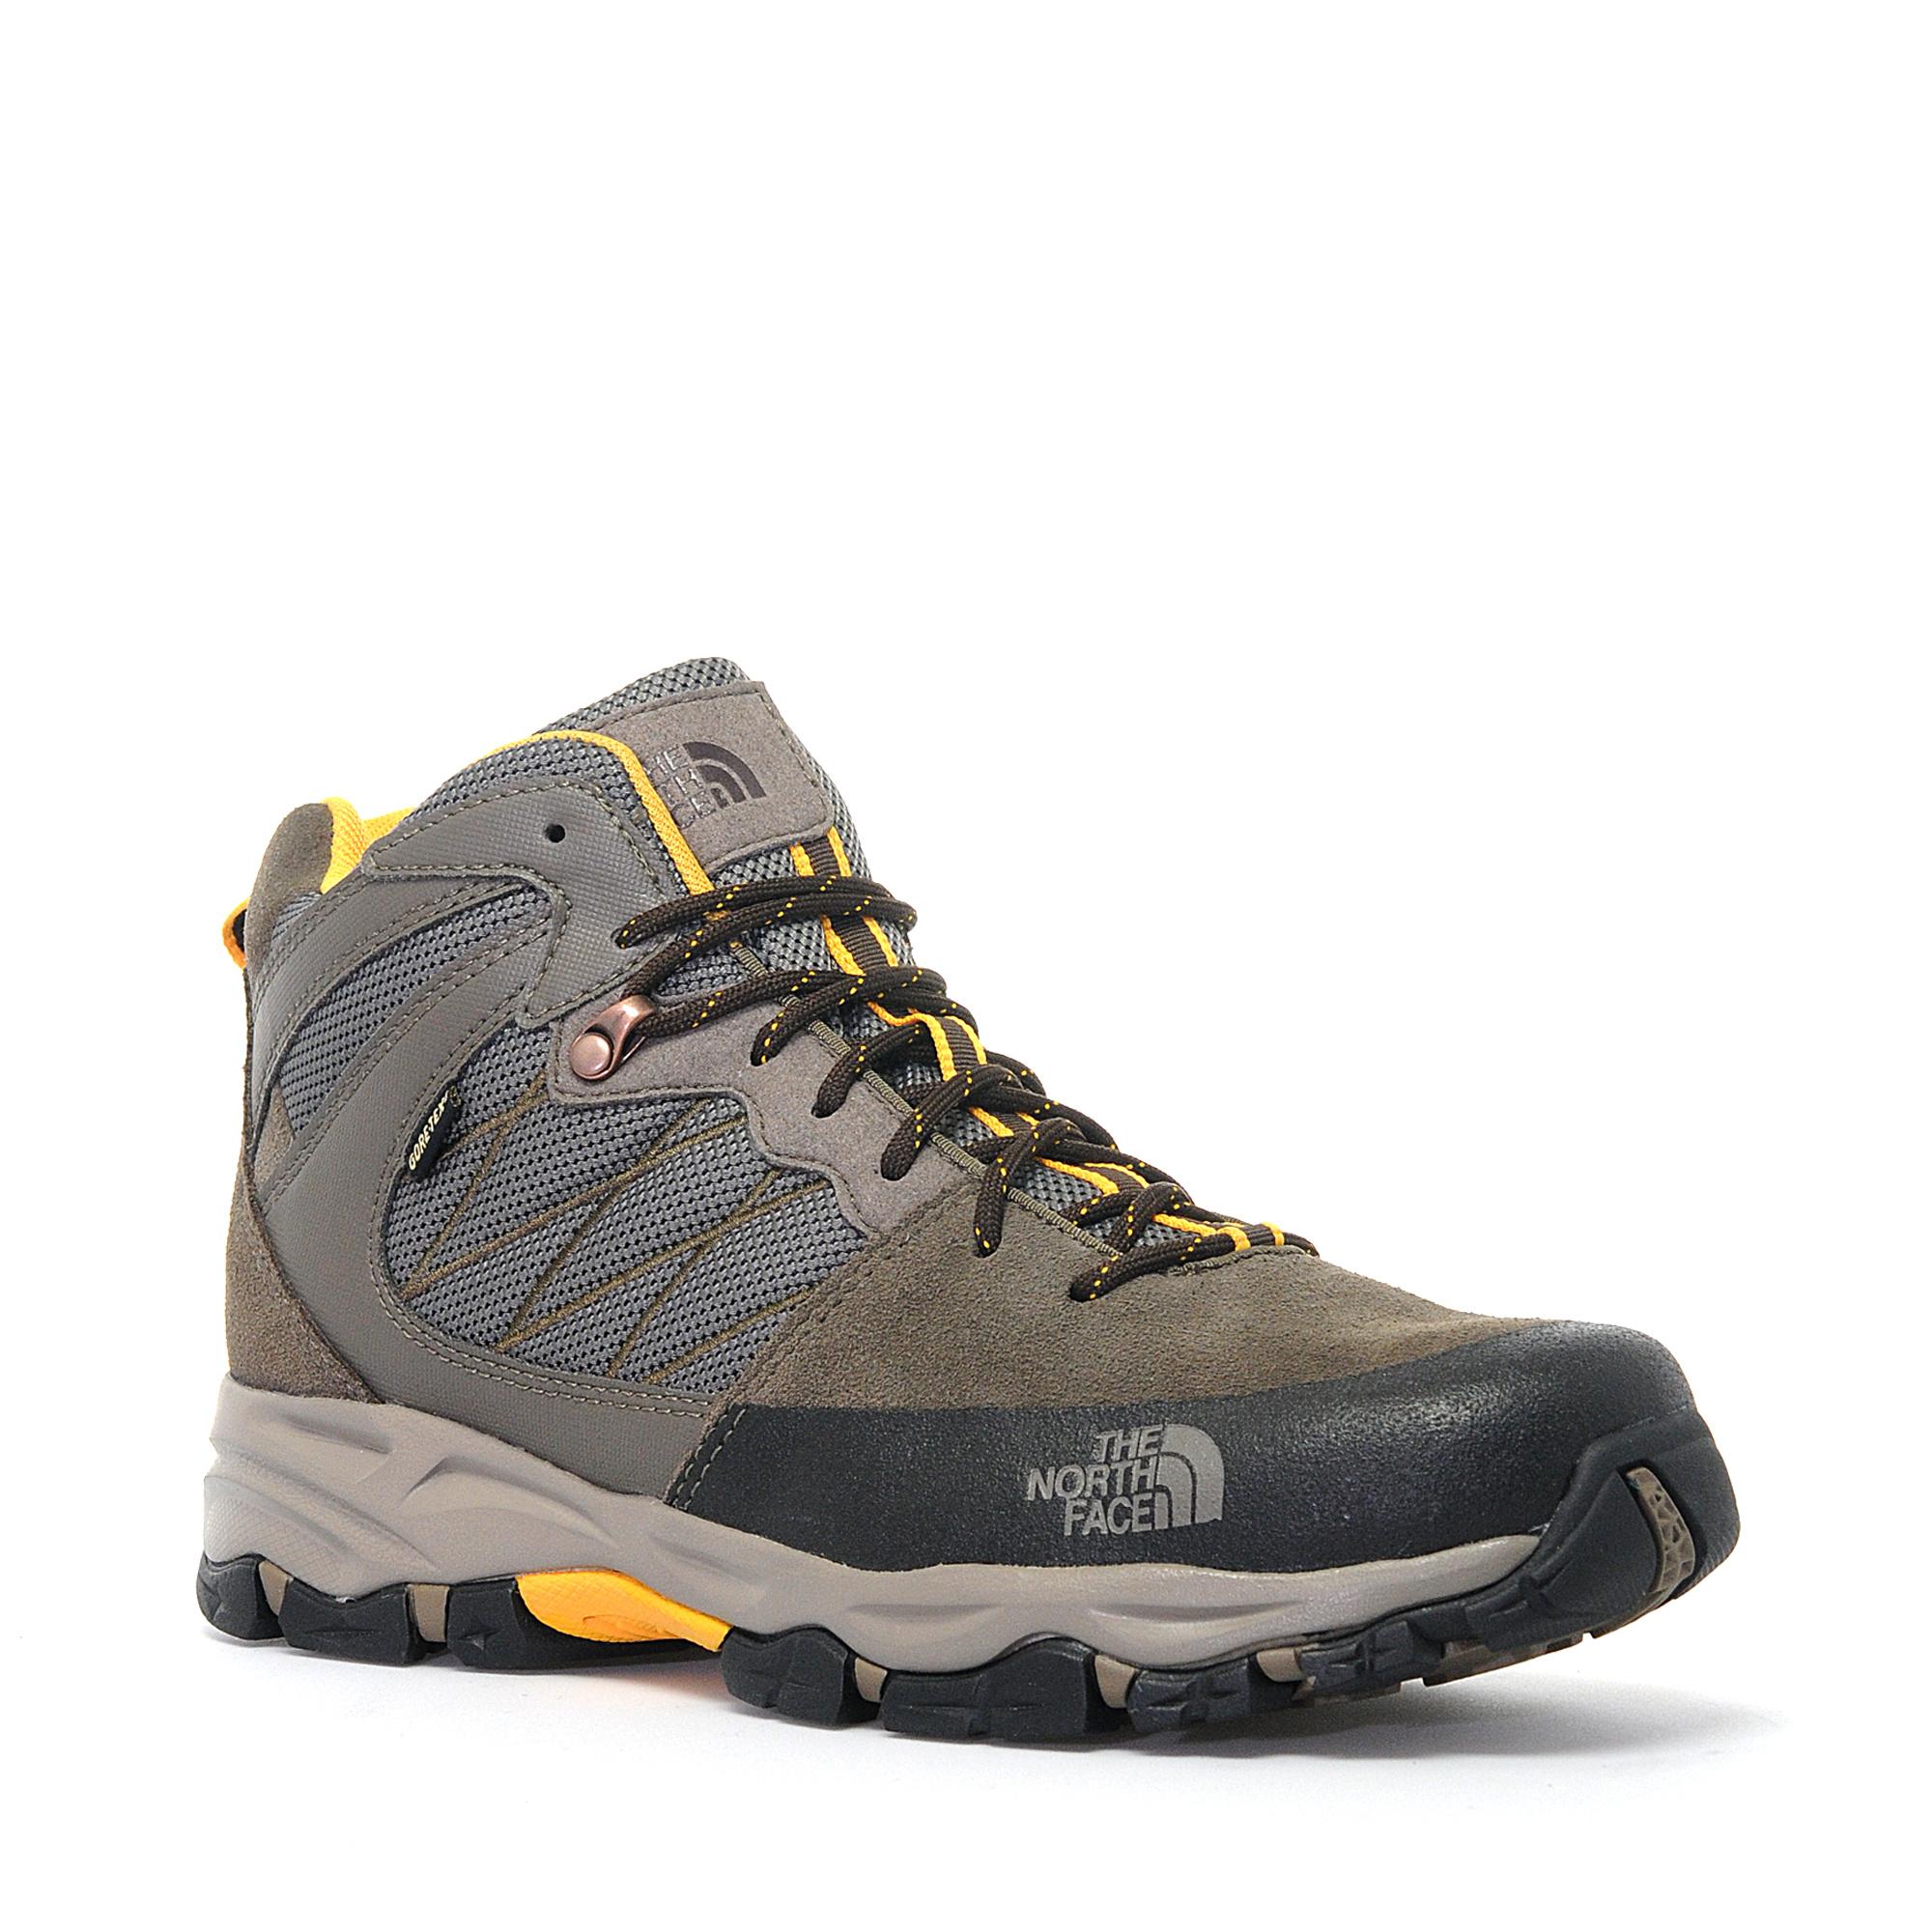 The North Face Men's Tempest Mid GORE-TEX® Hiking Boot